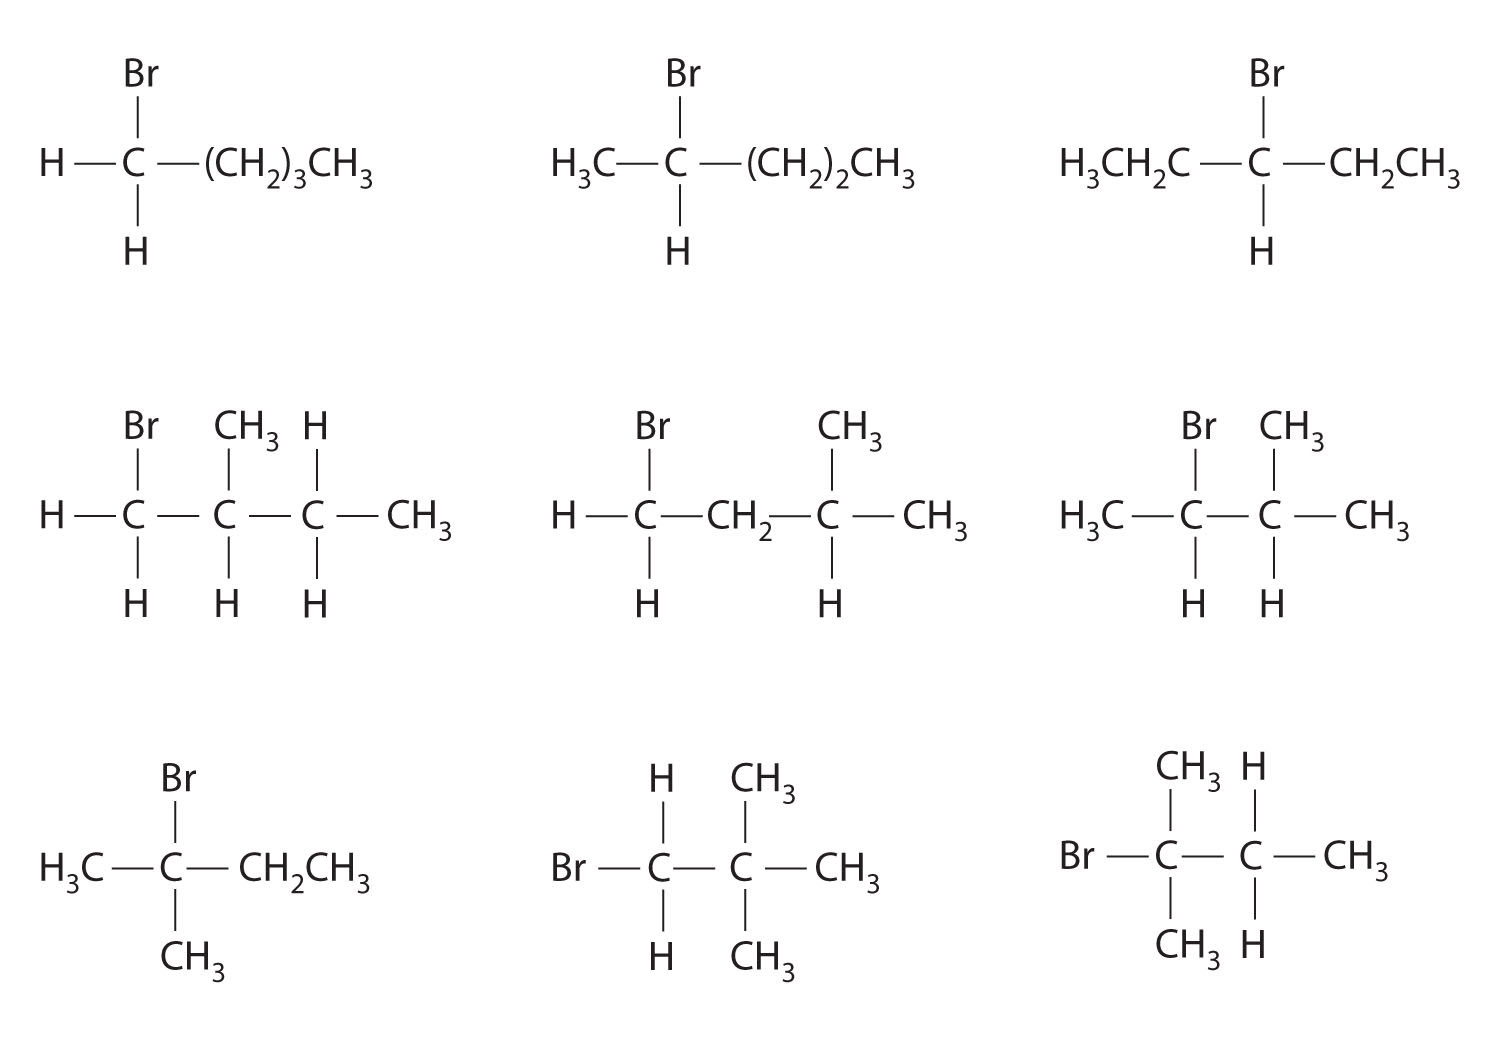 Isomers of Organic Compounds